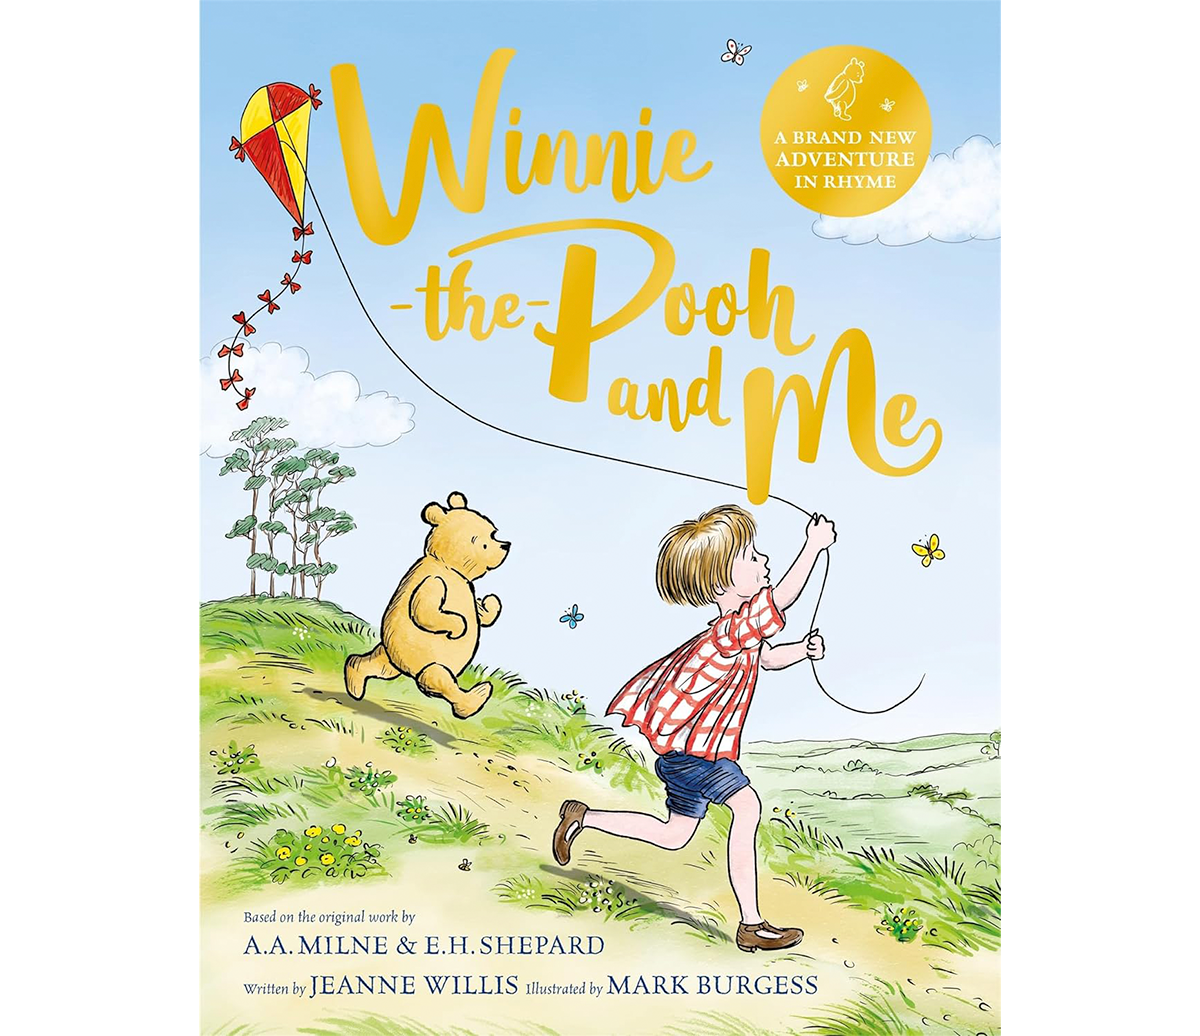 jeanne-willis-winnie-the-pooh-and-me.png